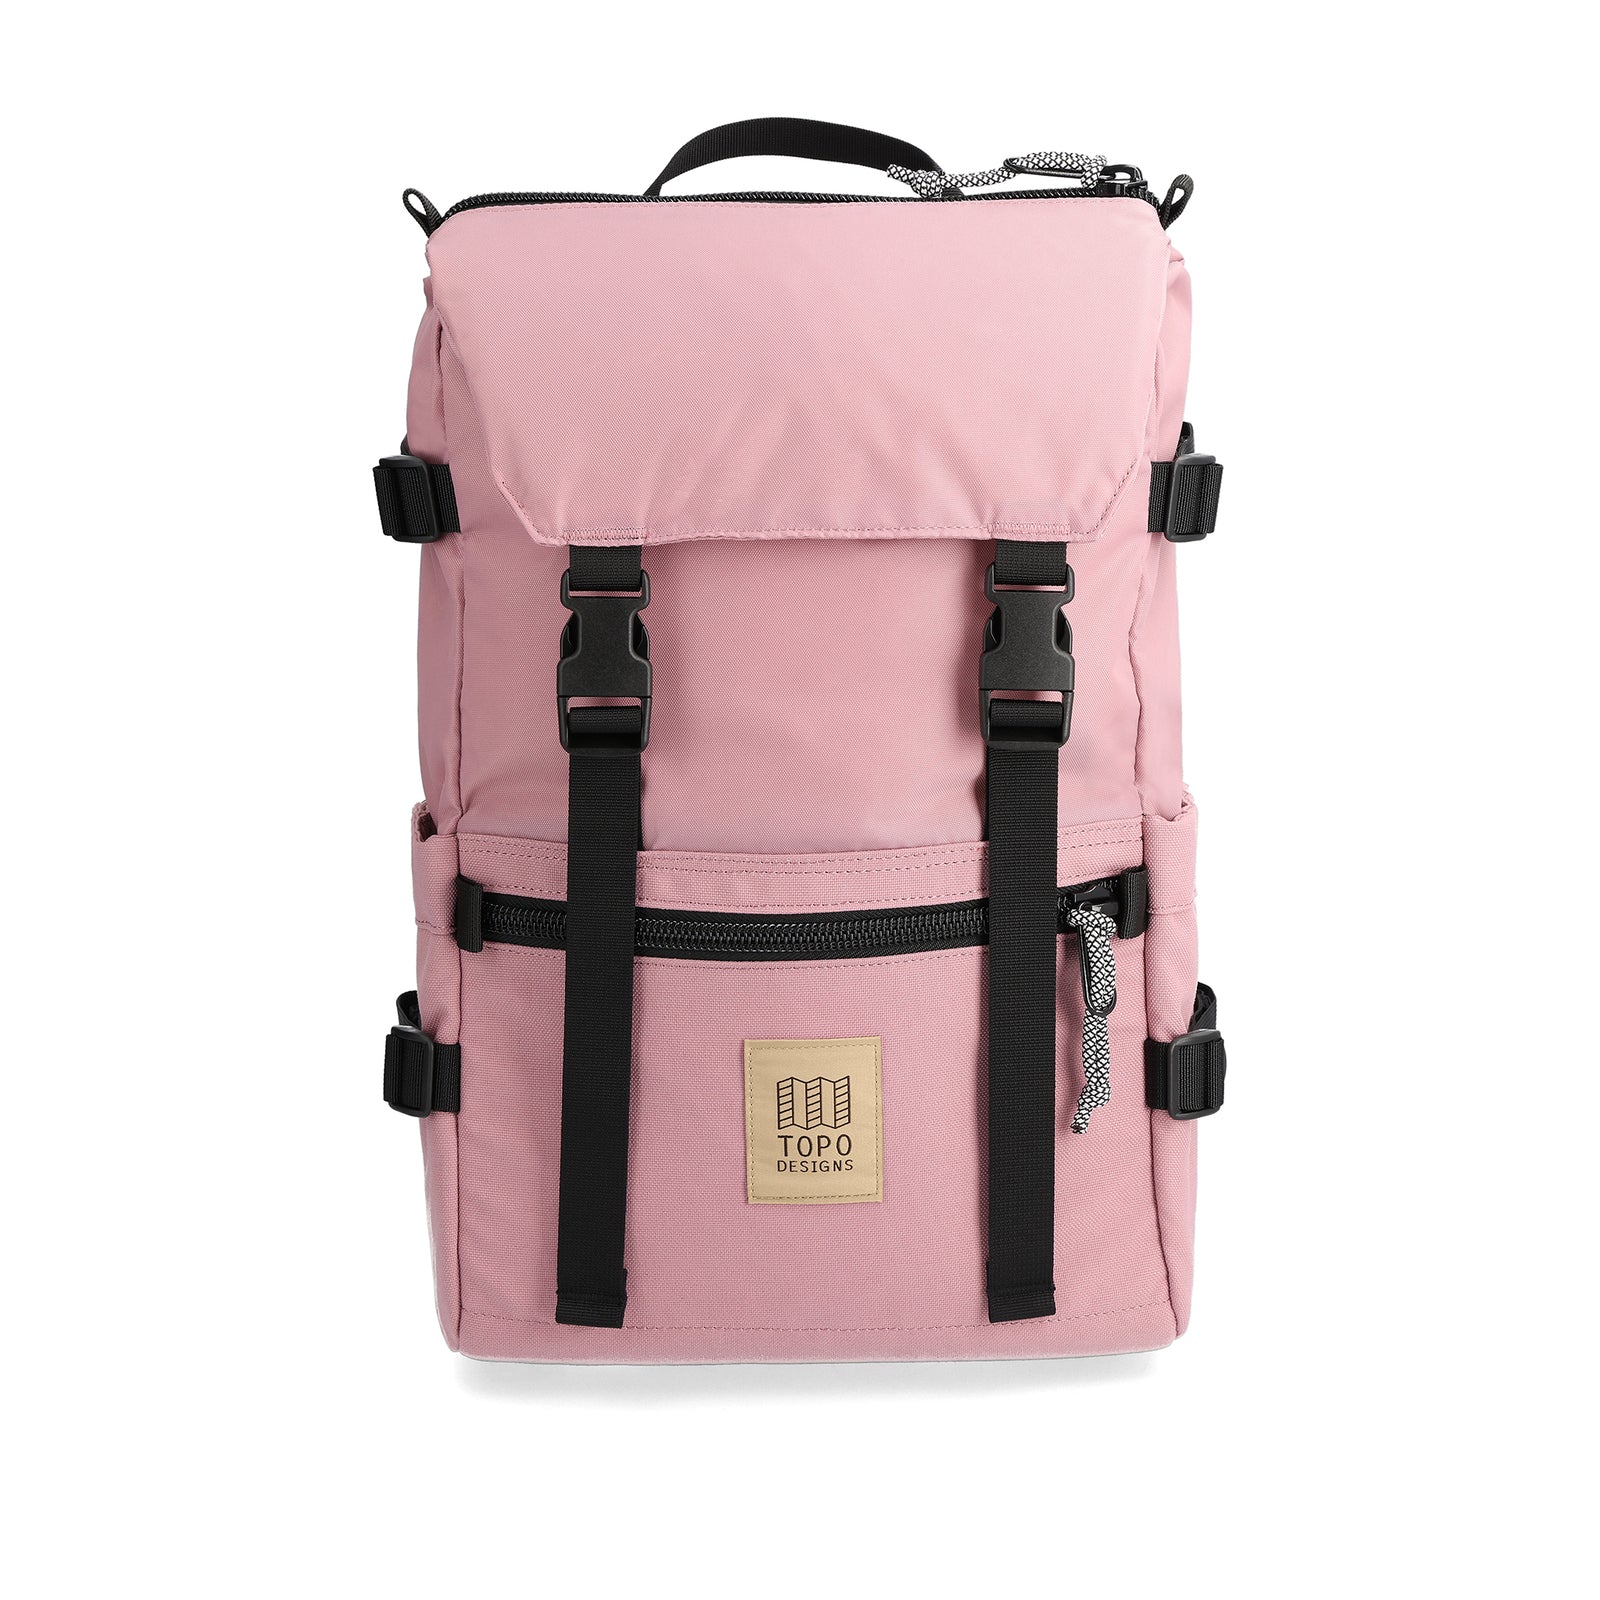 Front View of Topo Designs Rover Pack Classic in "Rose"